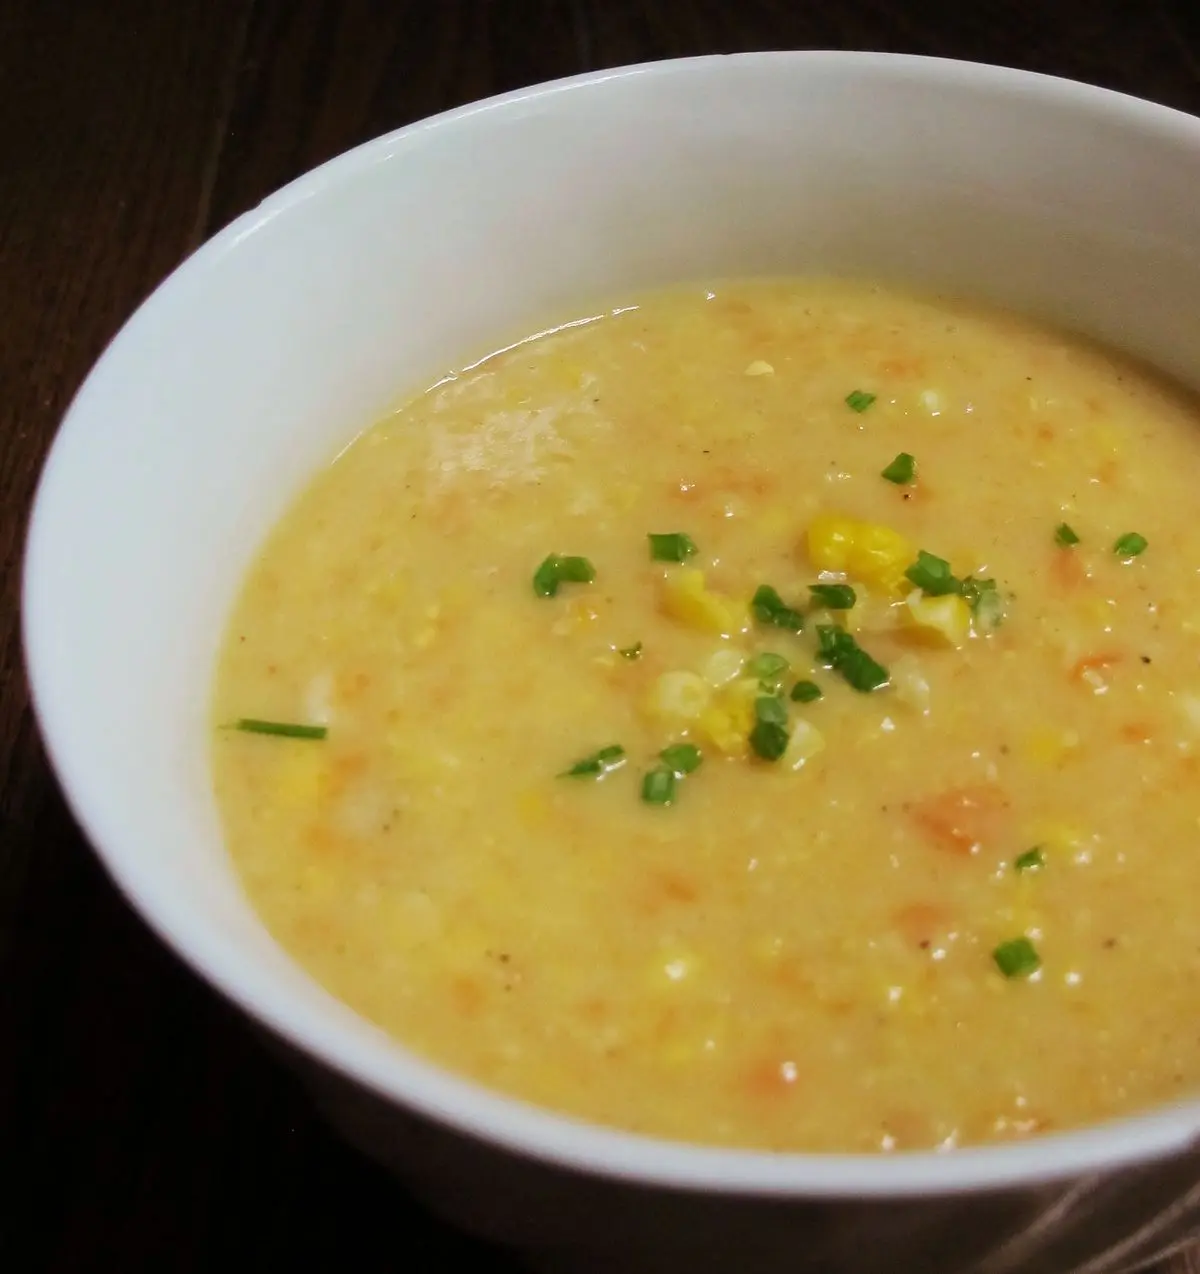 smoked corn chowder recipe - What does corn chowder contain